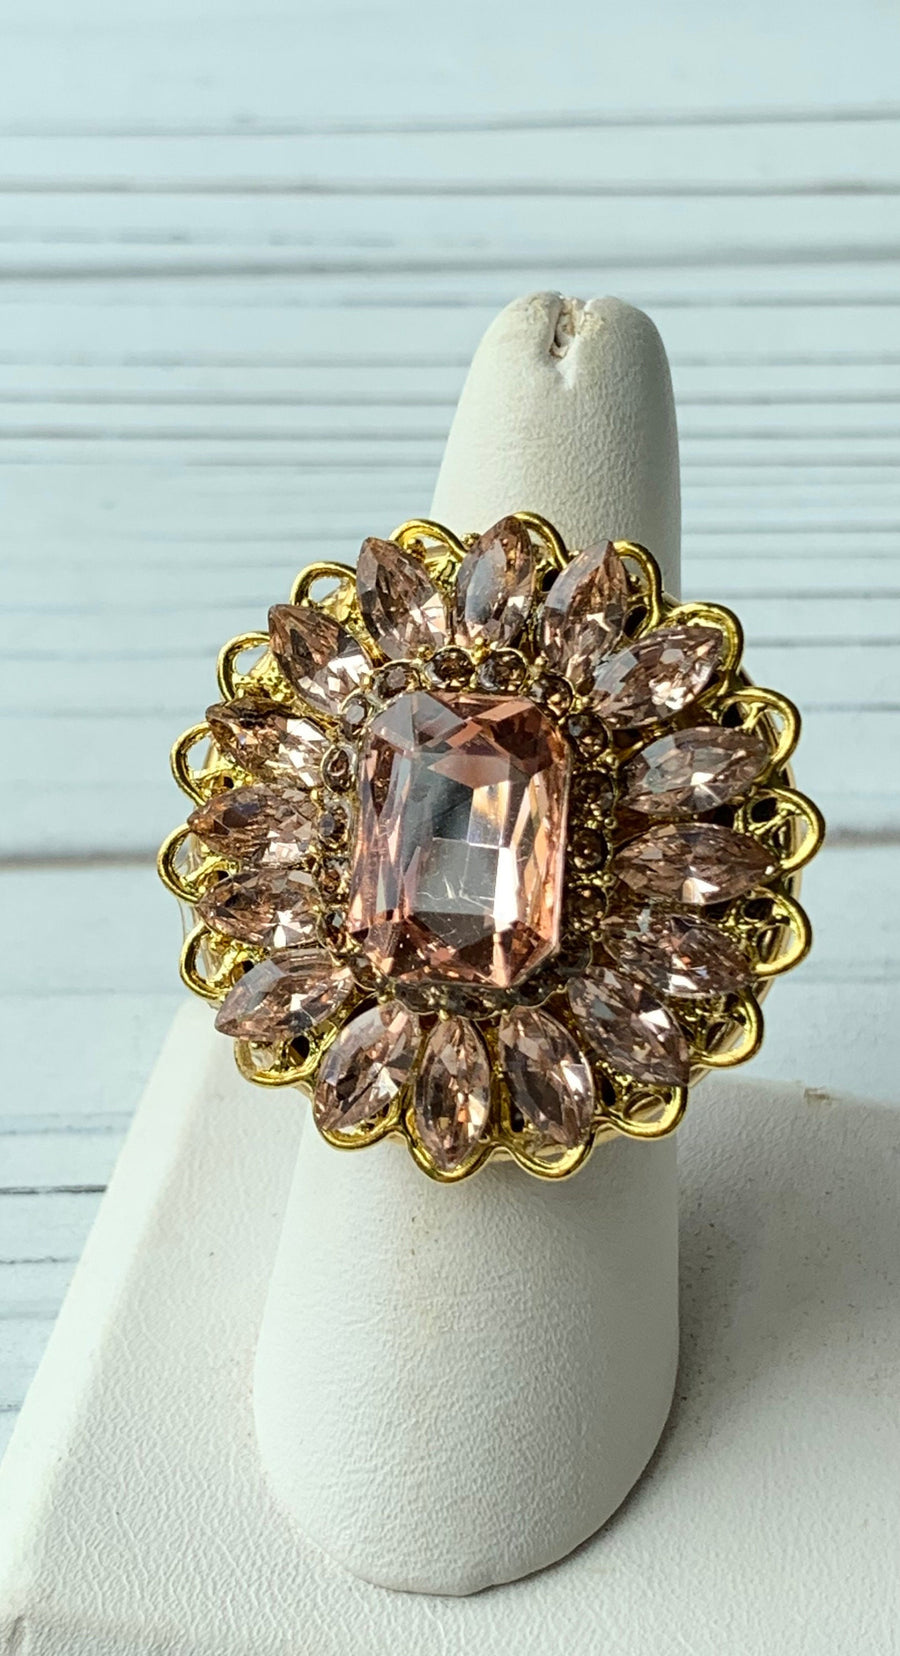 Lenora Dame Halley's Comet Cocktail Statement Ring